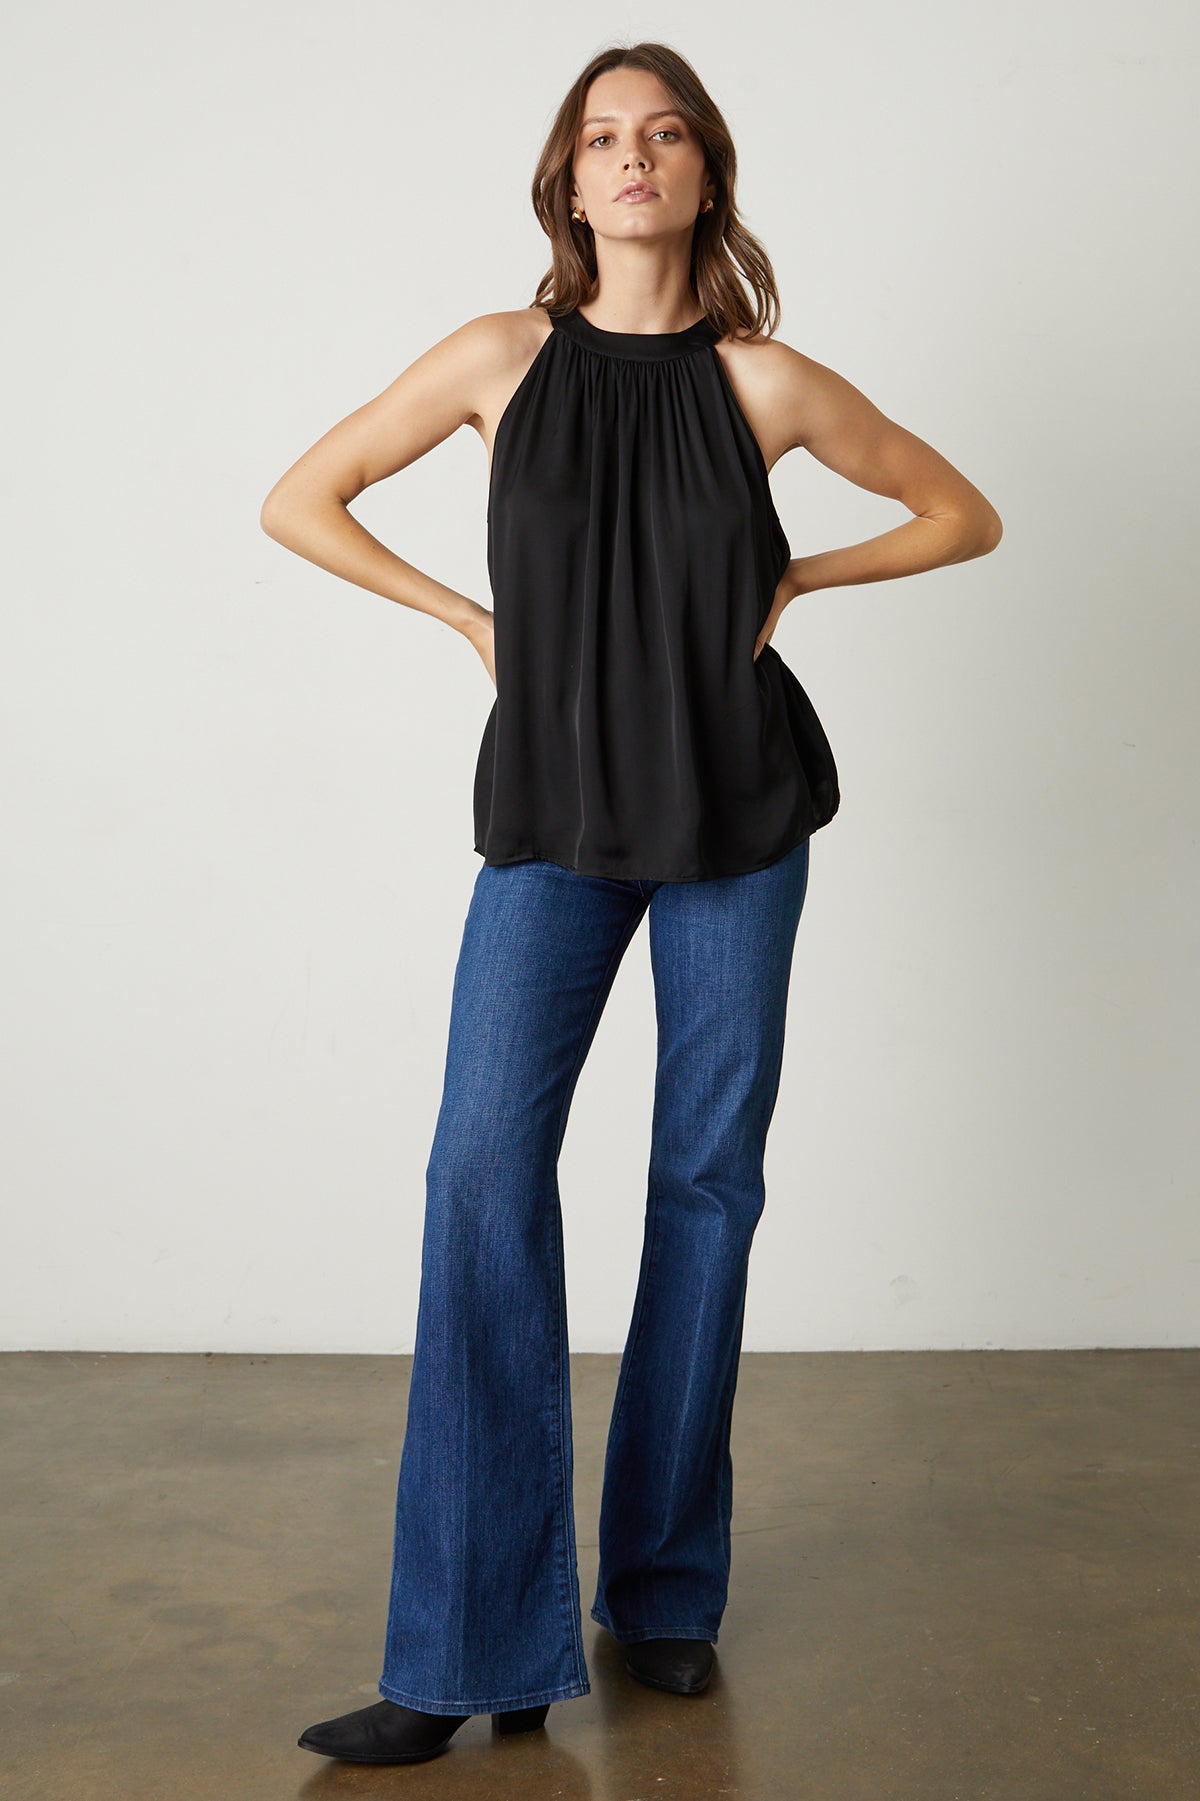 Model standing with hands on hips wearing Crystal Satin Halter Top in black with blue denim and black boots full length front-25548656705729